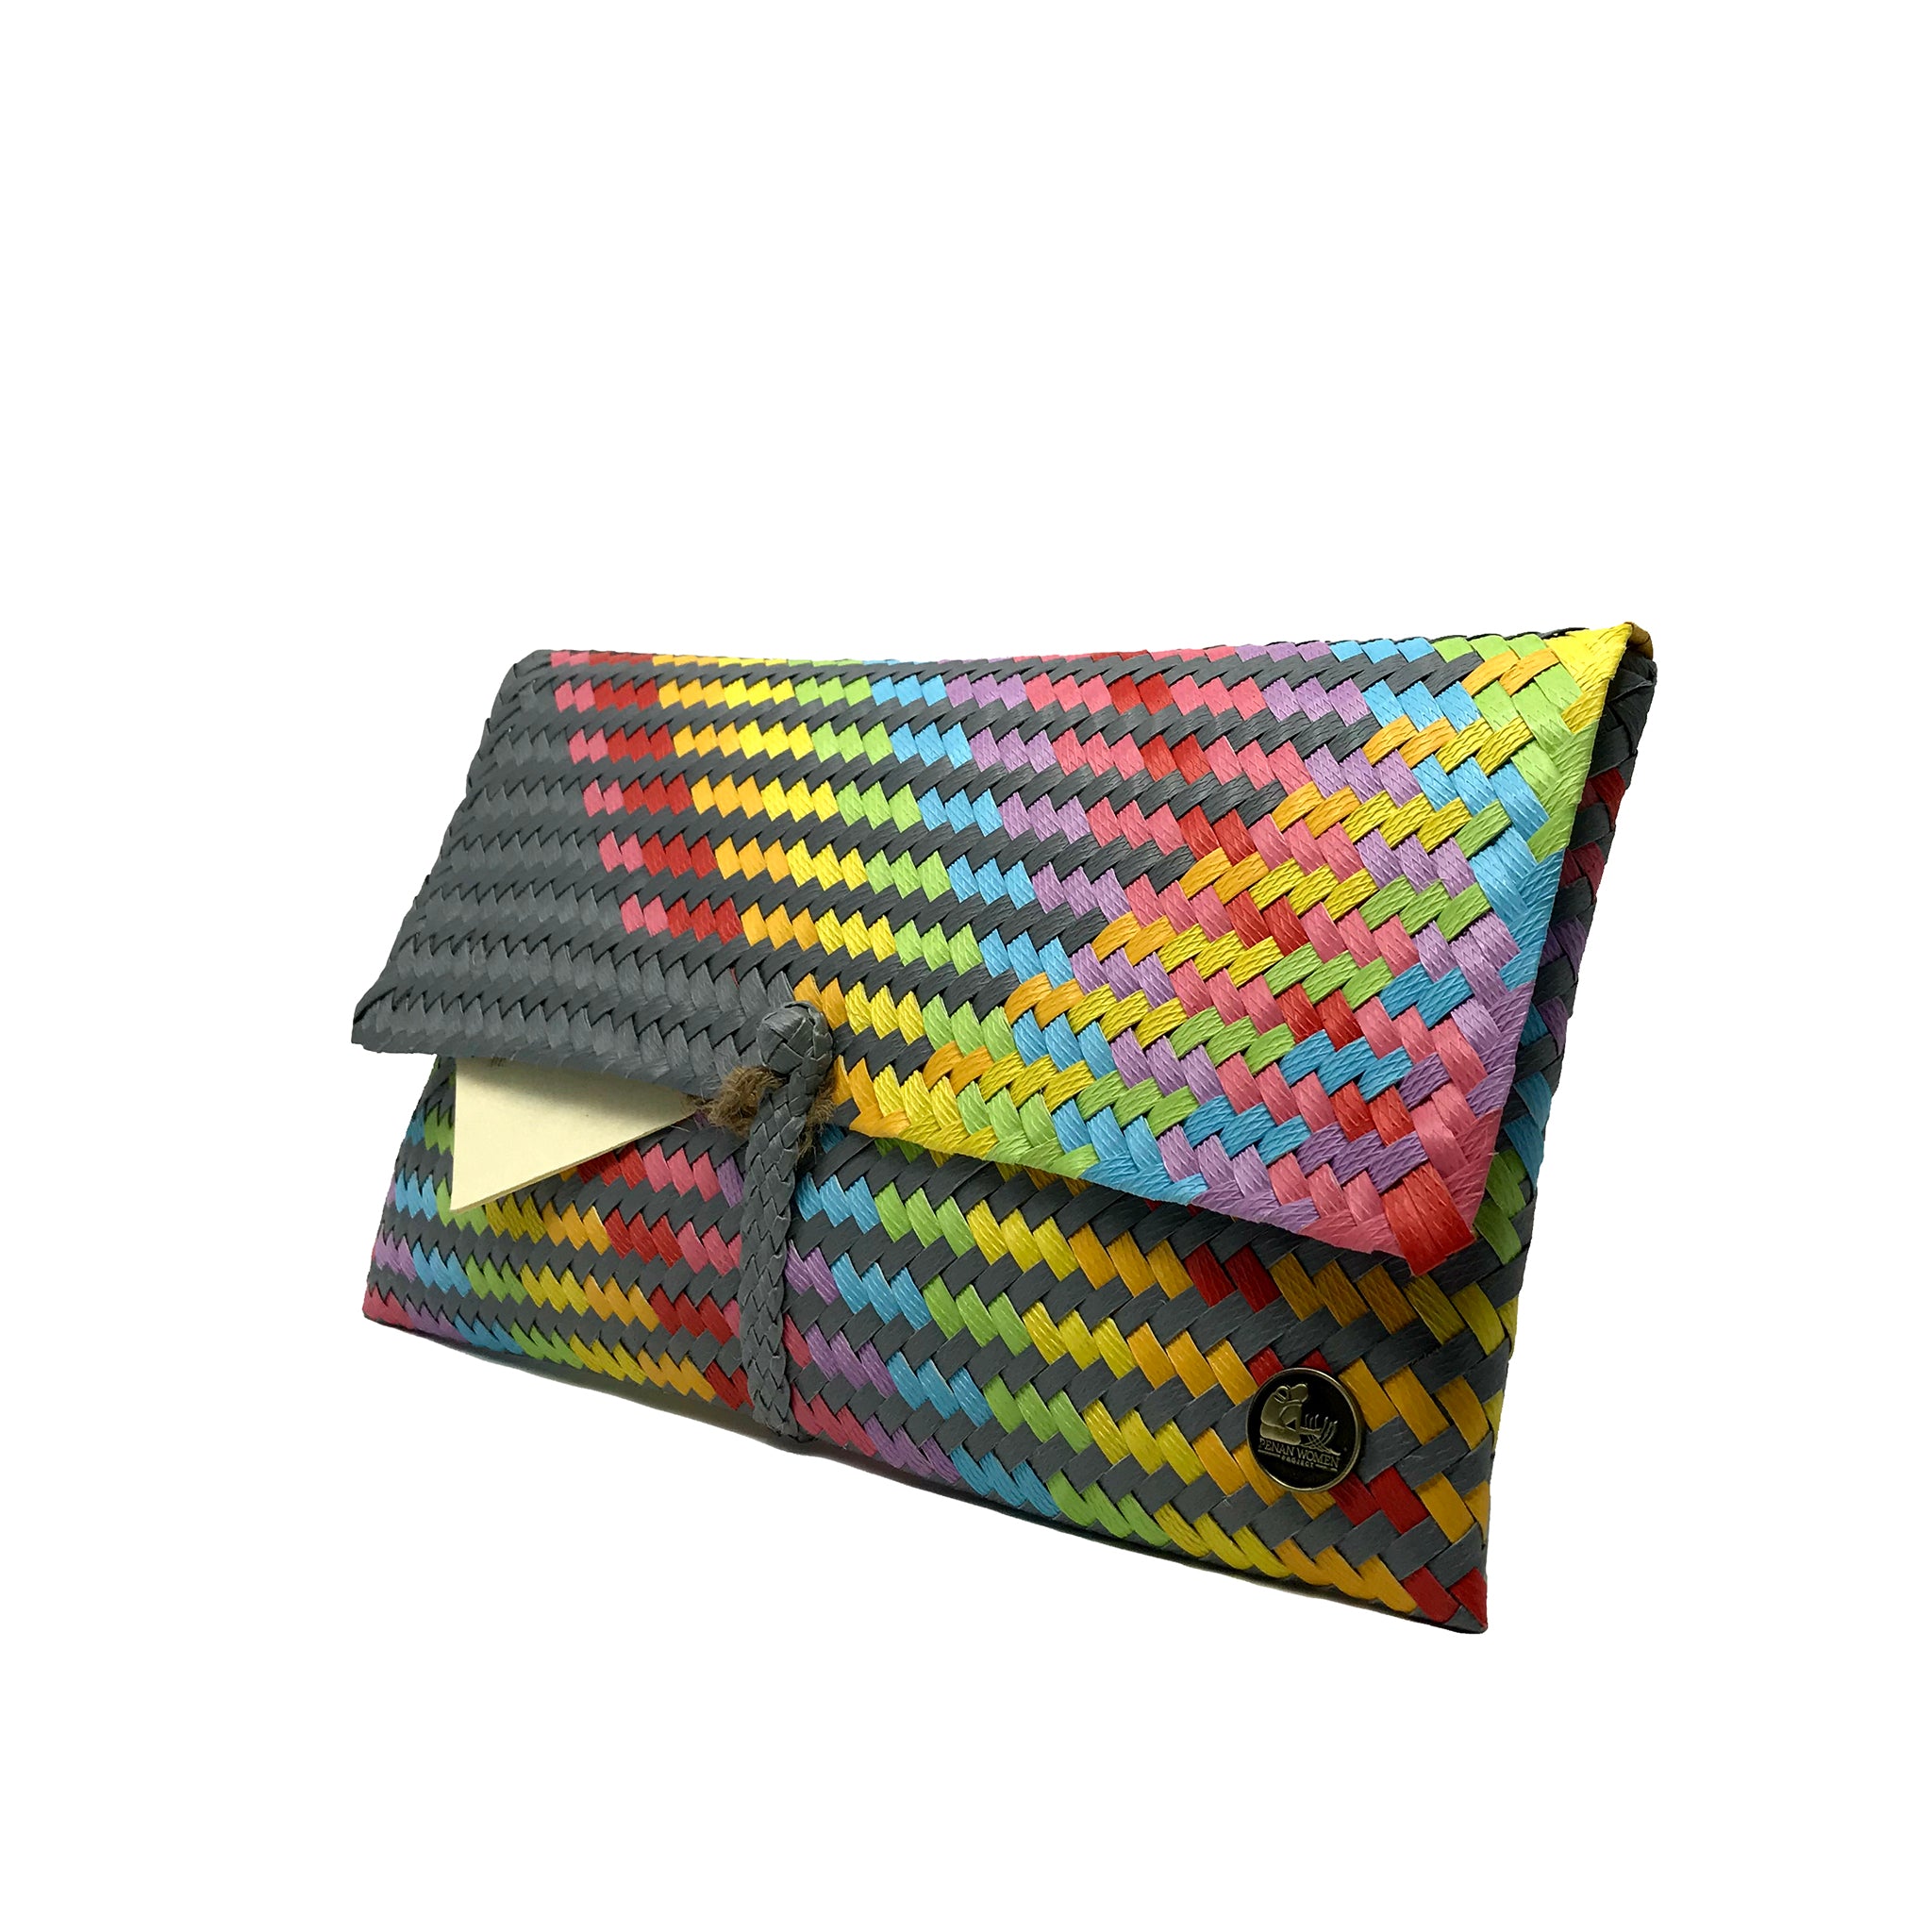 Rainbow clutch at a 45-degree angle.